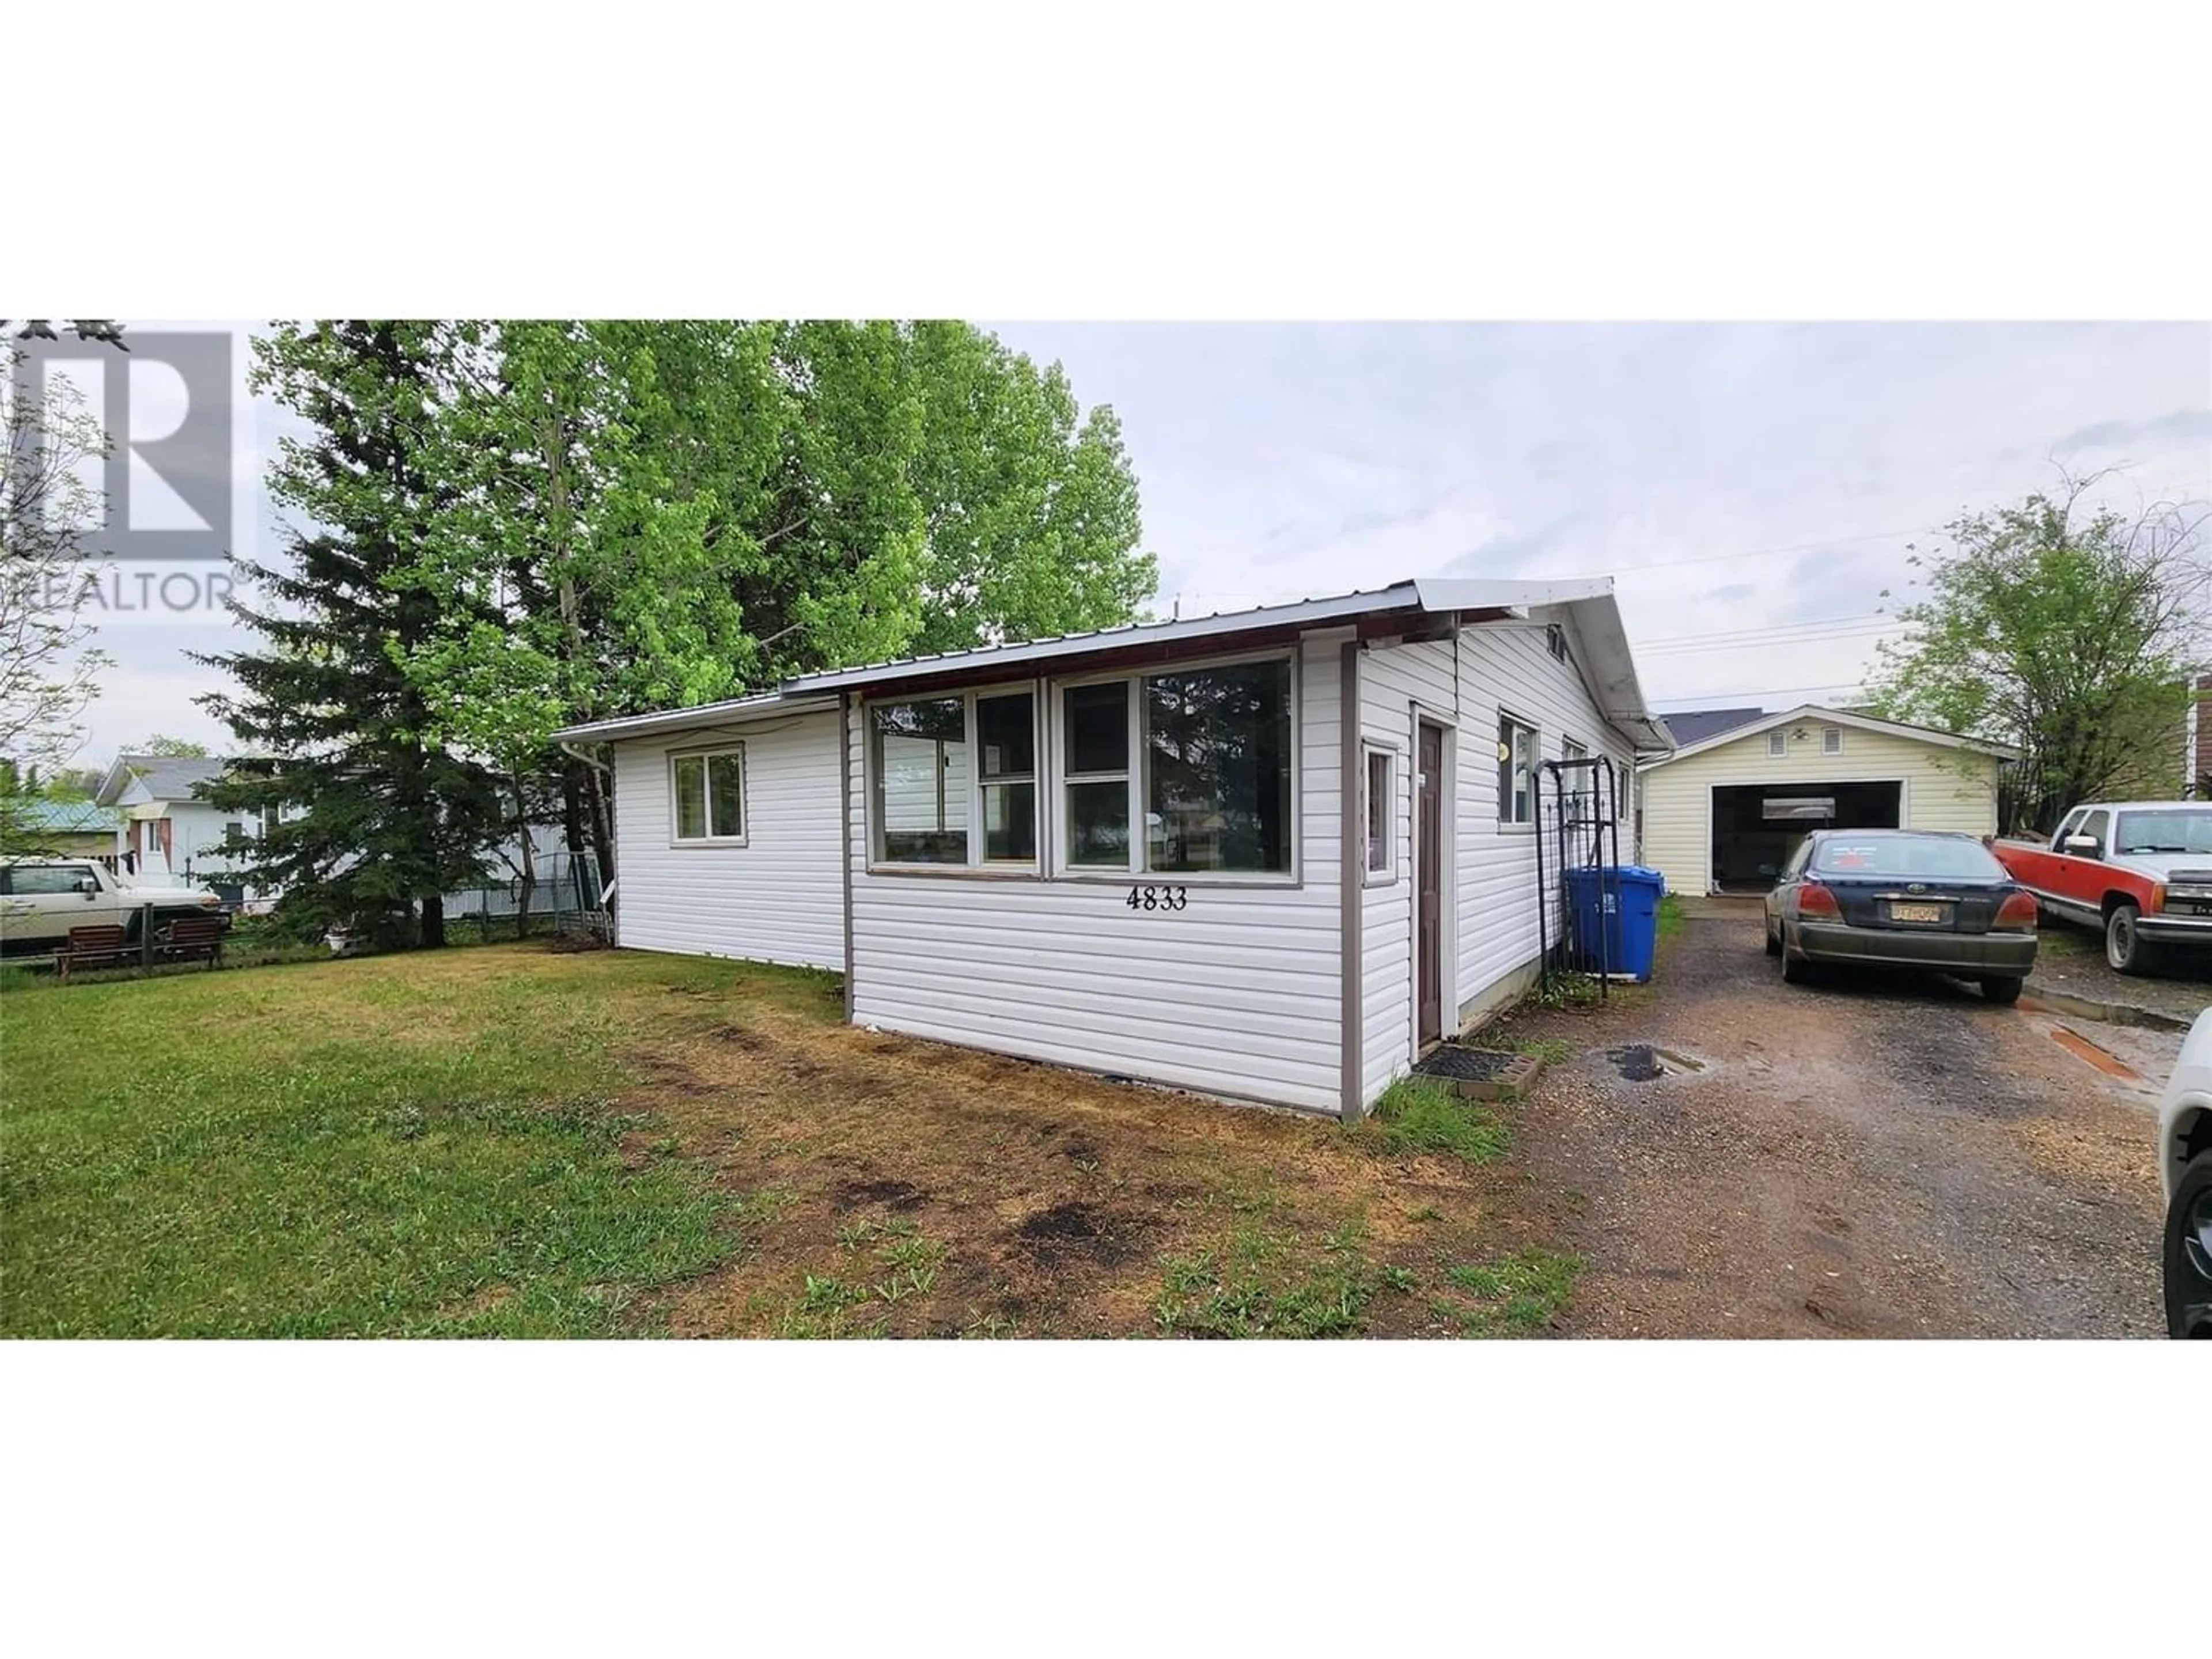 Shed for 4833 47 Avenue Unit# N/A, Pouce Coupe British Columbia V0C2C0